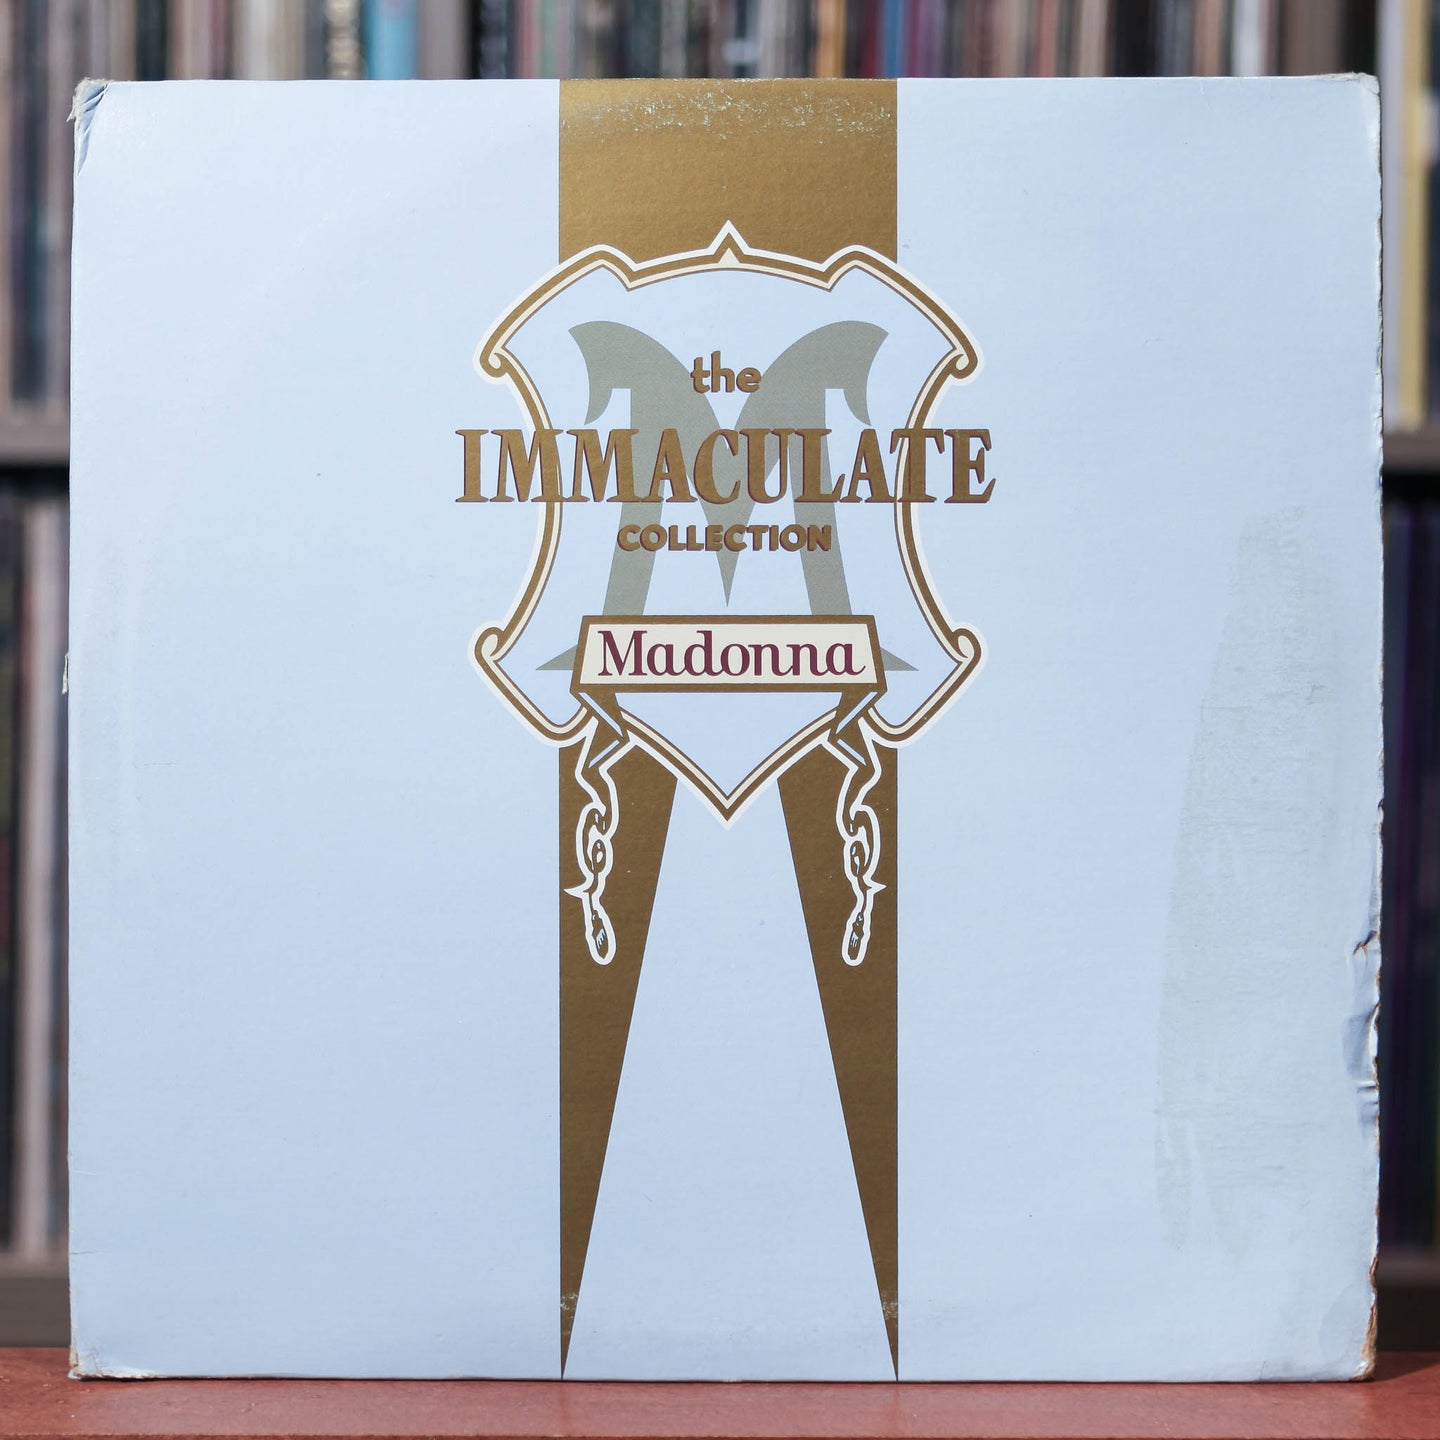 Madonna - The Immaculate Collection - 2LP - 1990 Sire, VG/VG